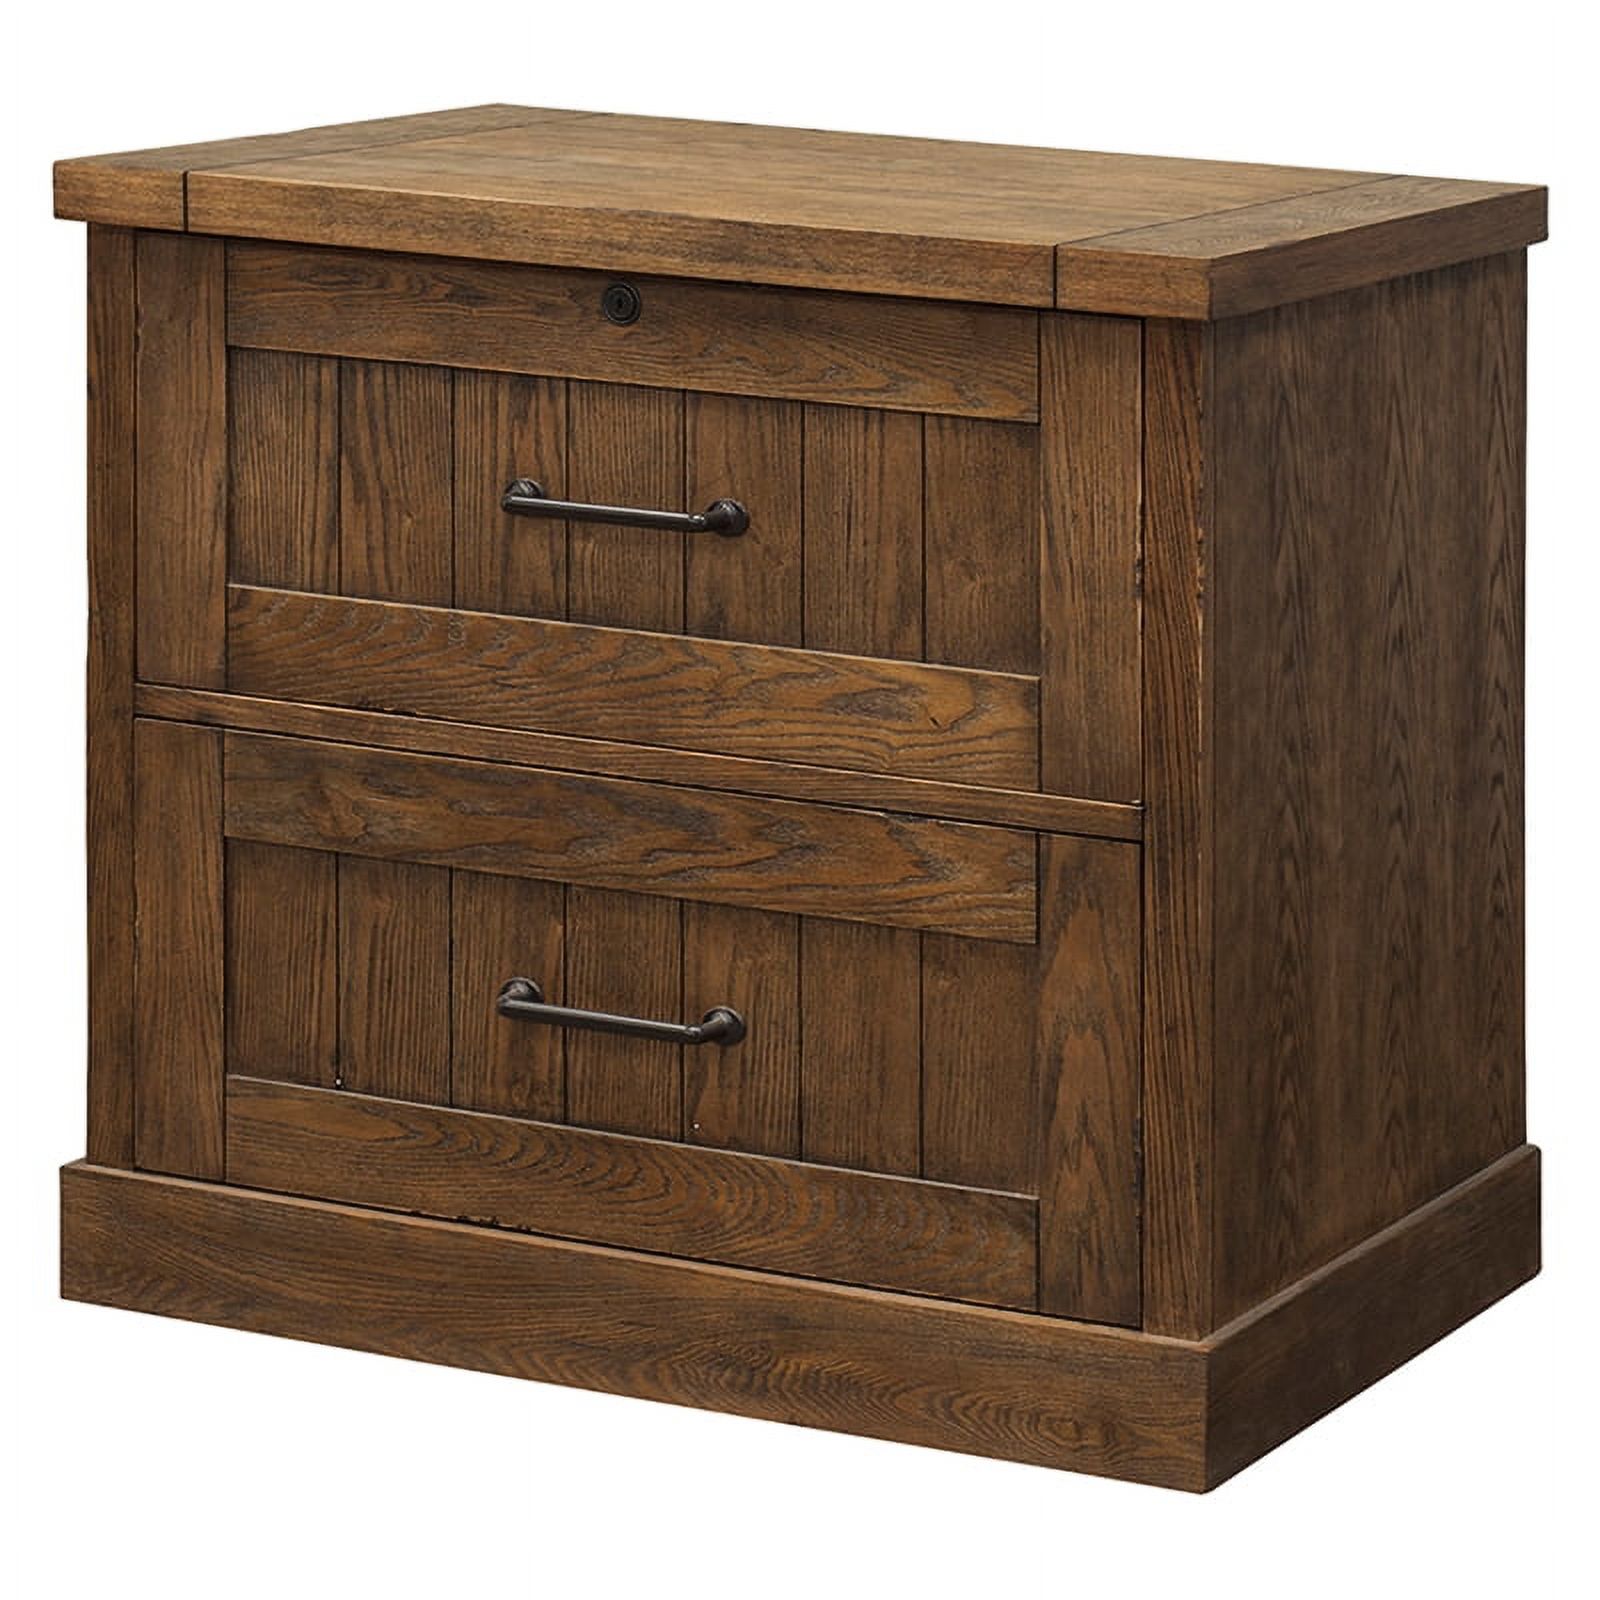 Avondale Wood Lateral File With Locking File Drawer Fully Assembled Brown - image 3 of 6